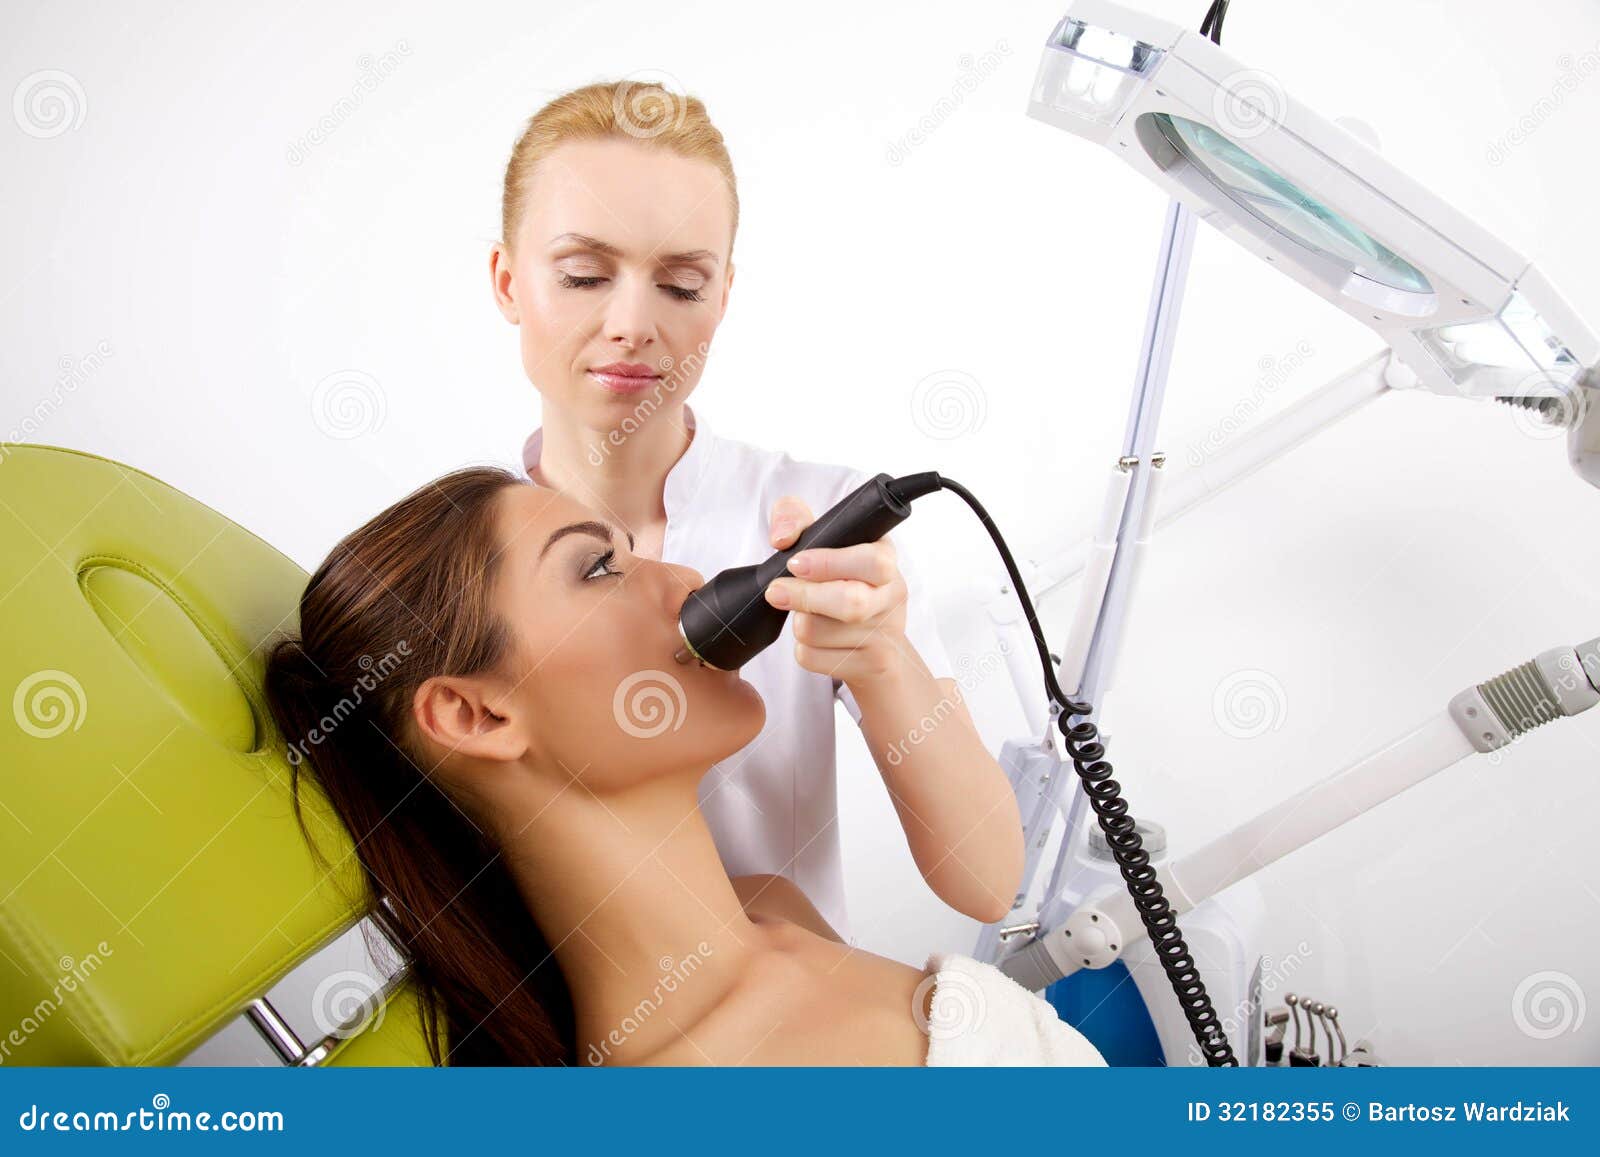 Woman Having A Stimulating Facial Treatment From A Therapist Stock Image Image Of Dermatology